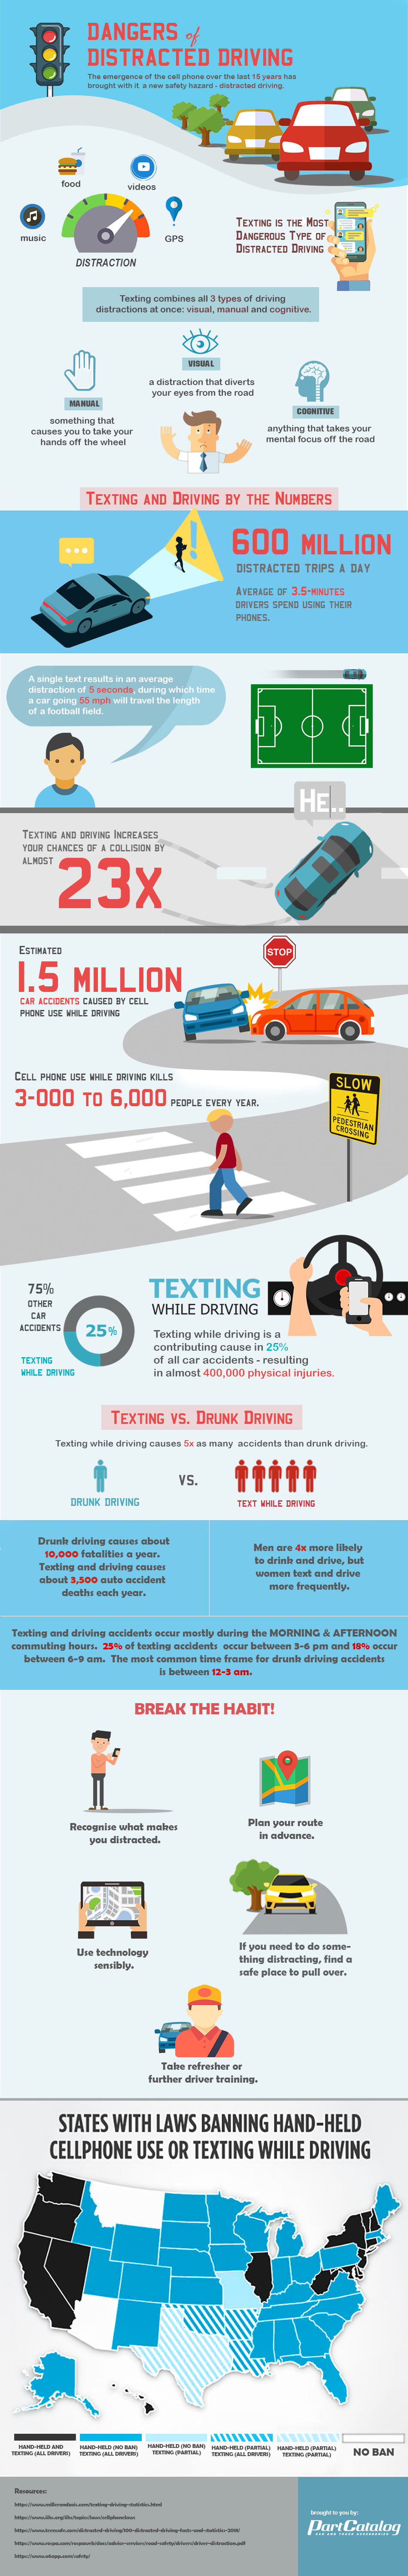 Hazards of Distracted Driving Every Parent Should Know